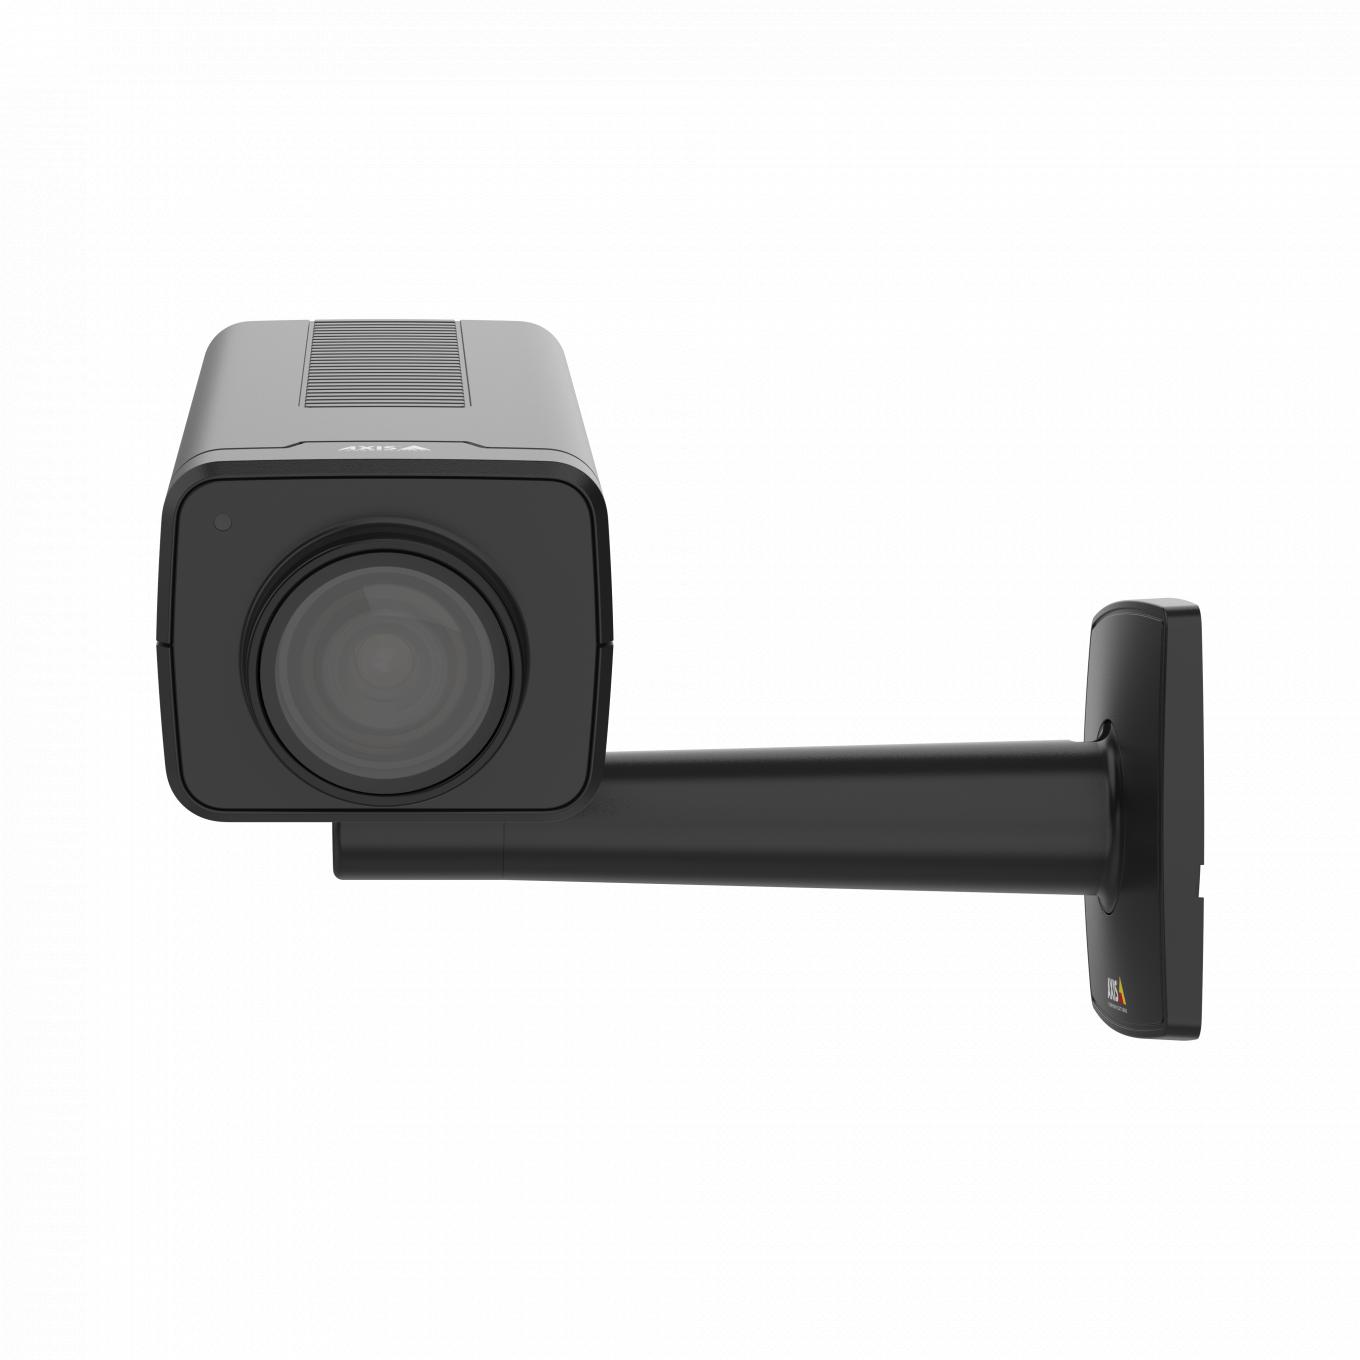  AXIS Q1715 Block Camera from its front